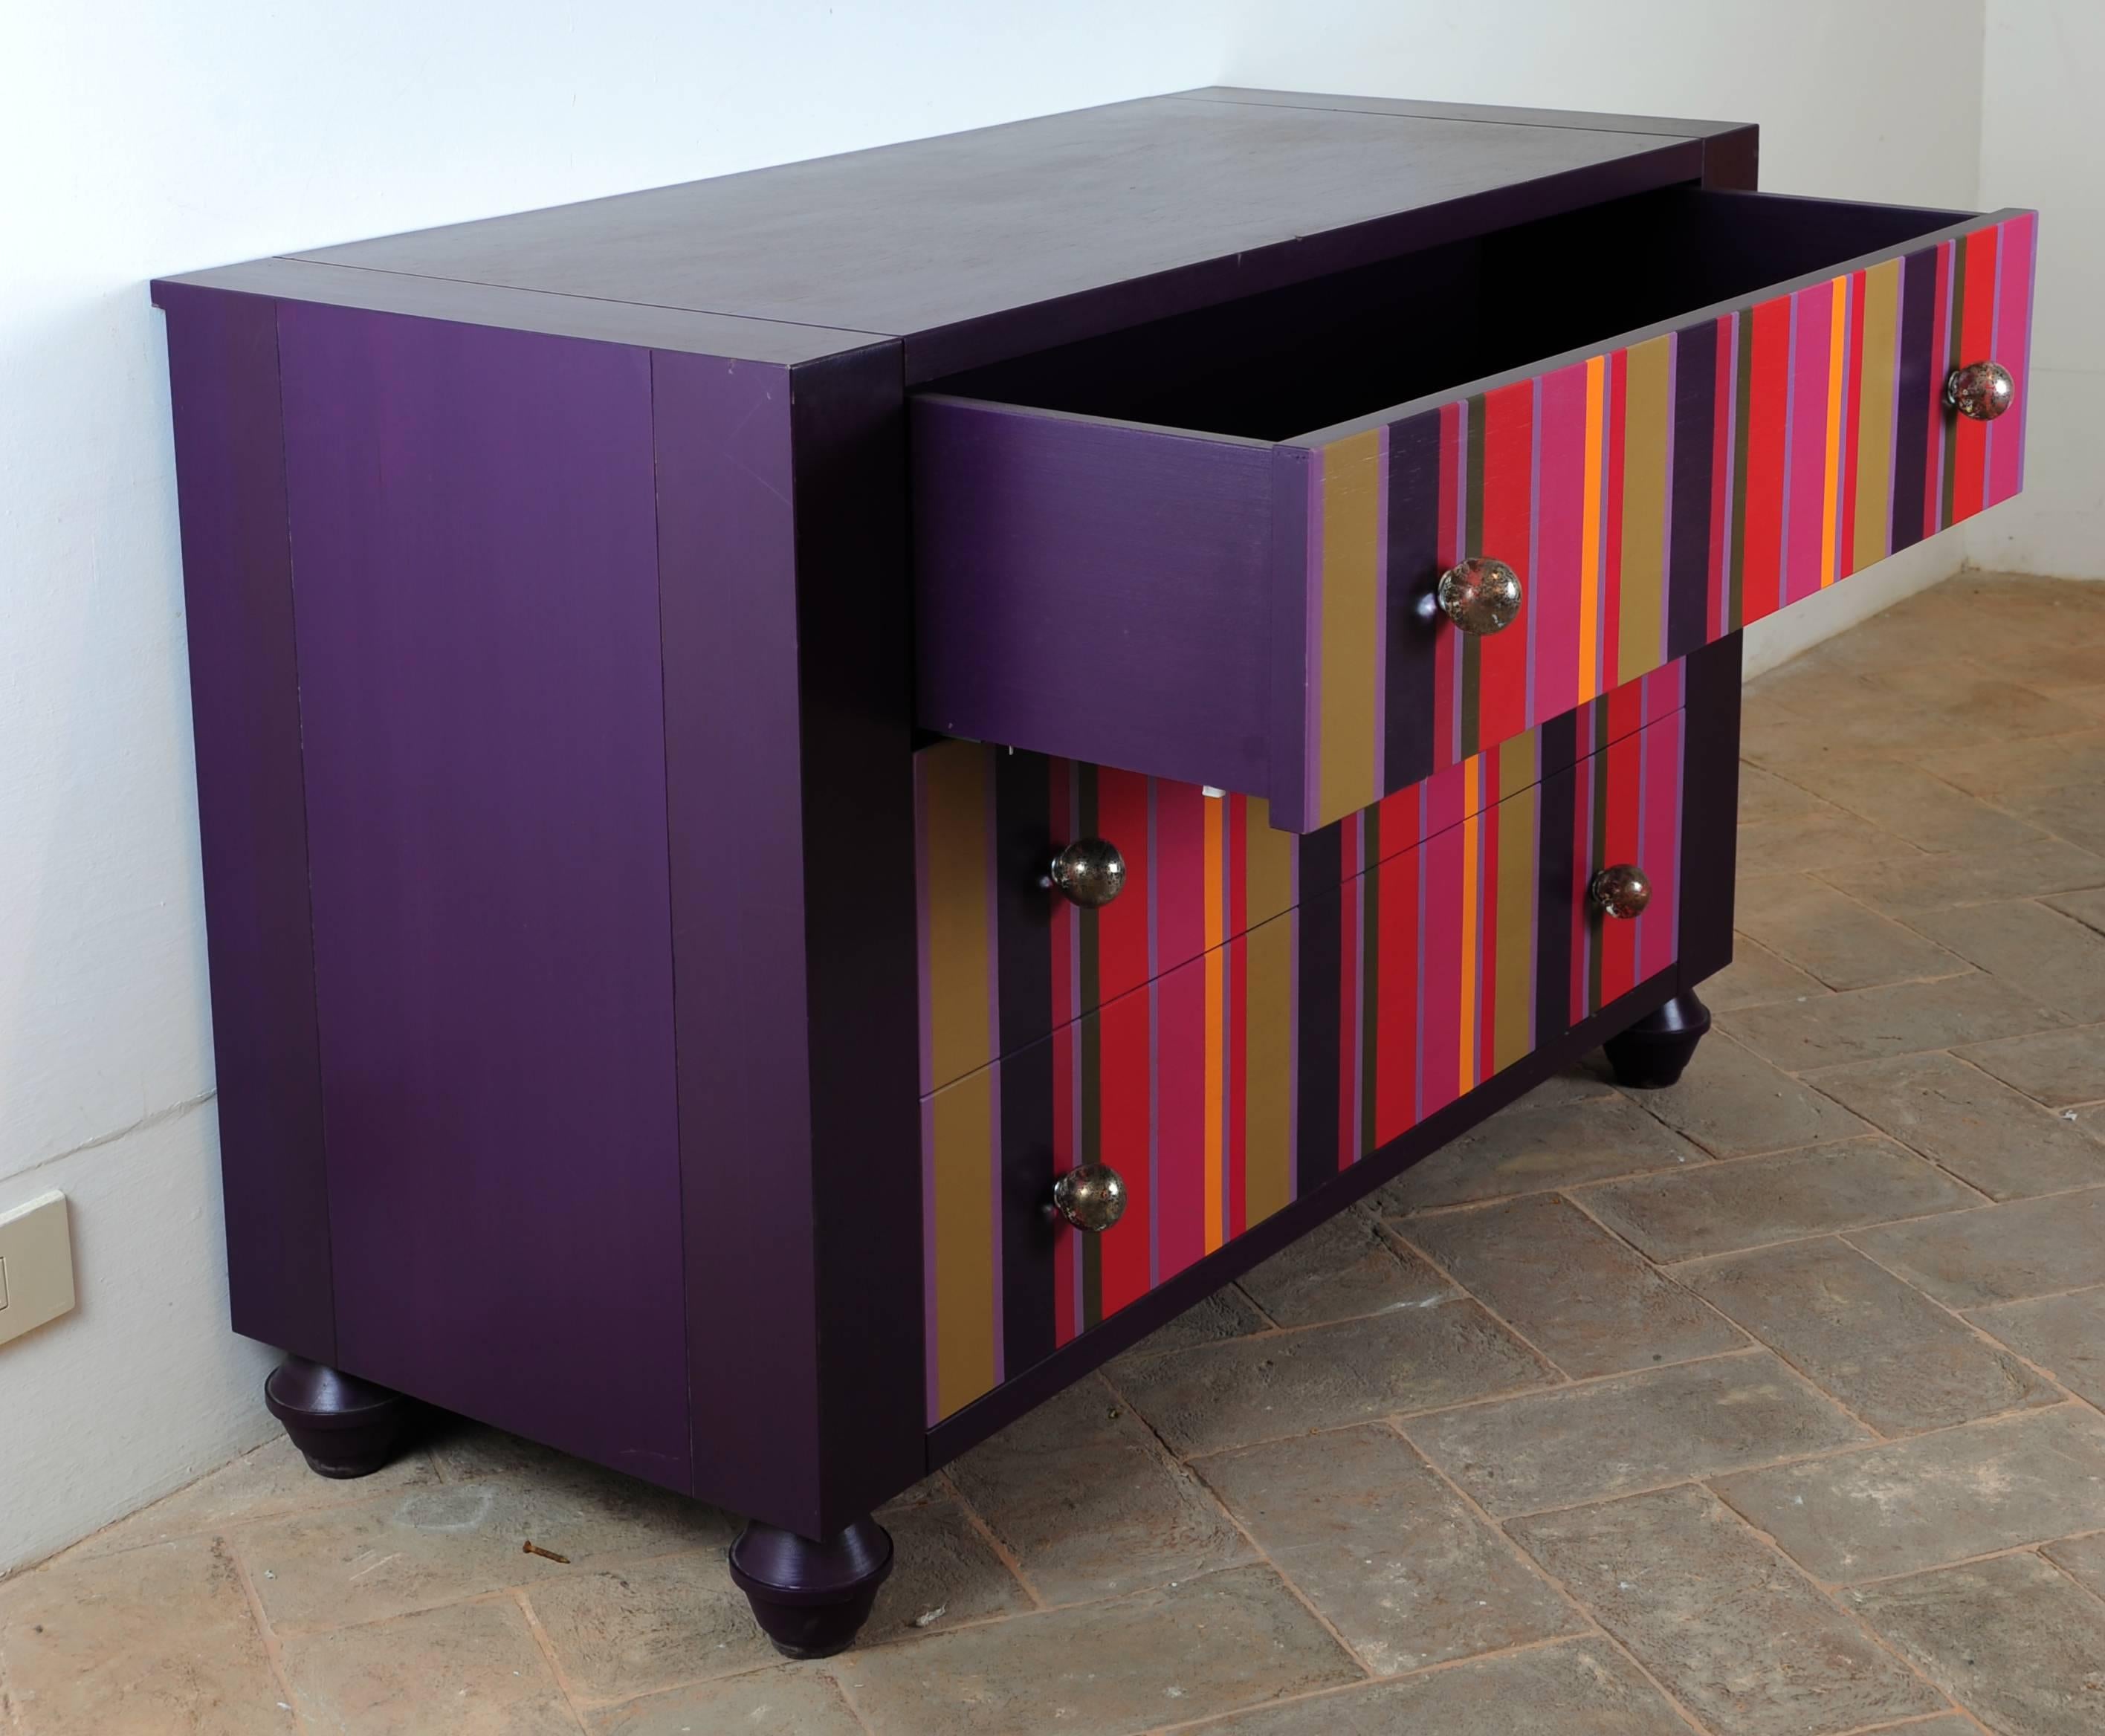 Beautiful airbrushed chest of drawers. Handmade in toulipier wood with glass knobs. Like all the pieces from the Bottega G. Michelangeli, this artisan dining table it is made by master Italian woodworkers with traditional technique and modern